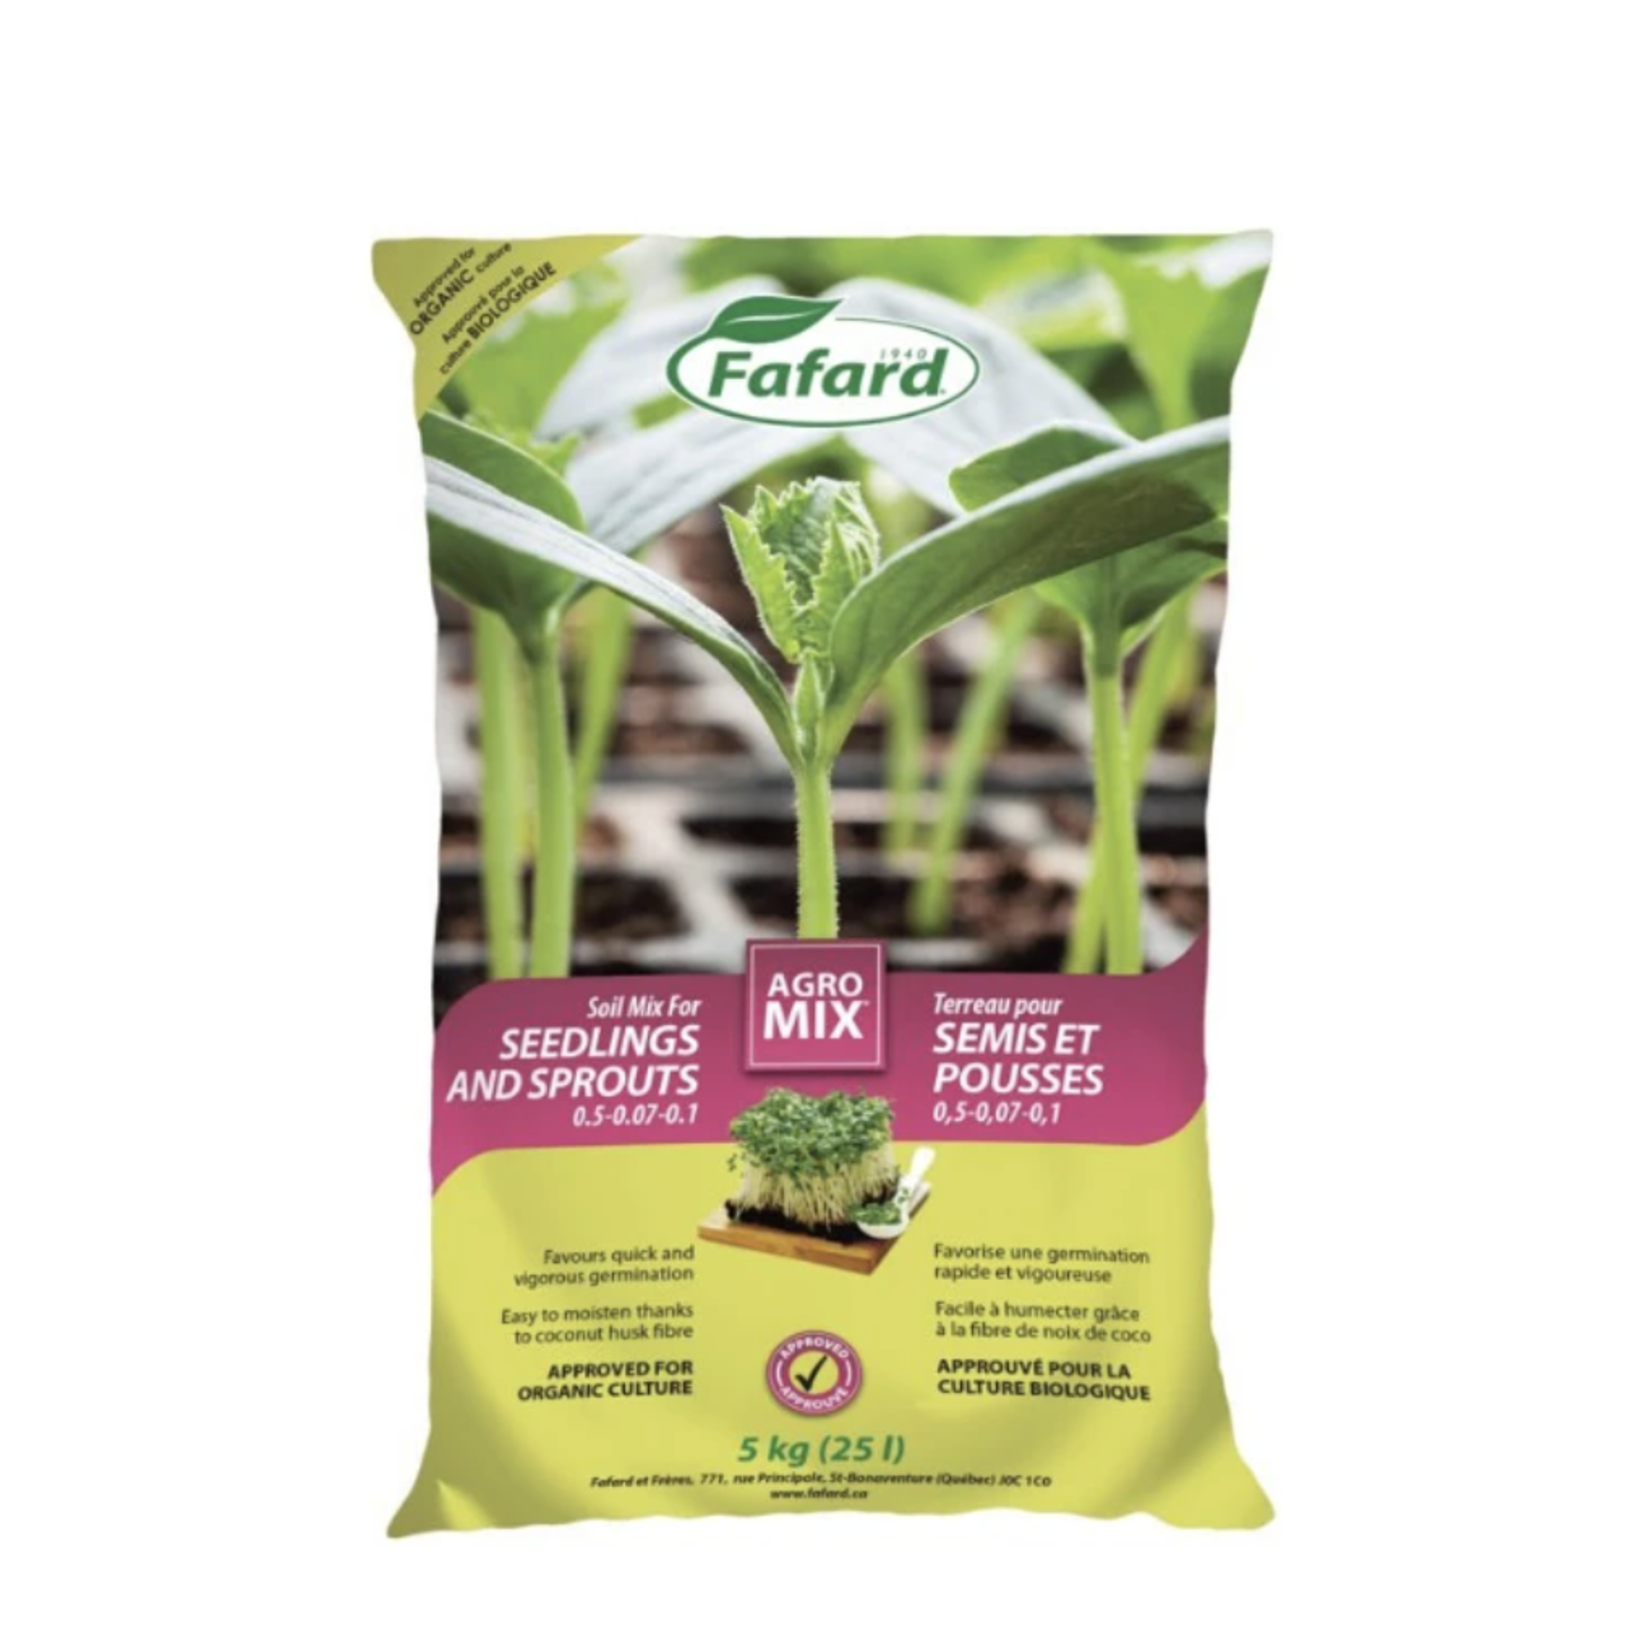 Fafard Soil Mix for Seedlings and Sprouts 25 L